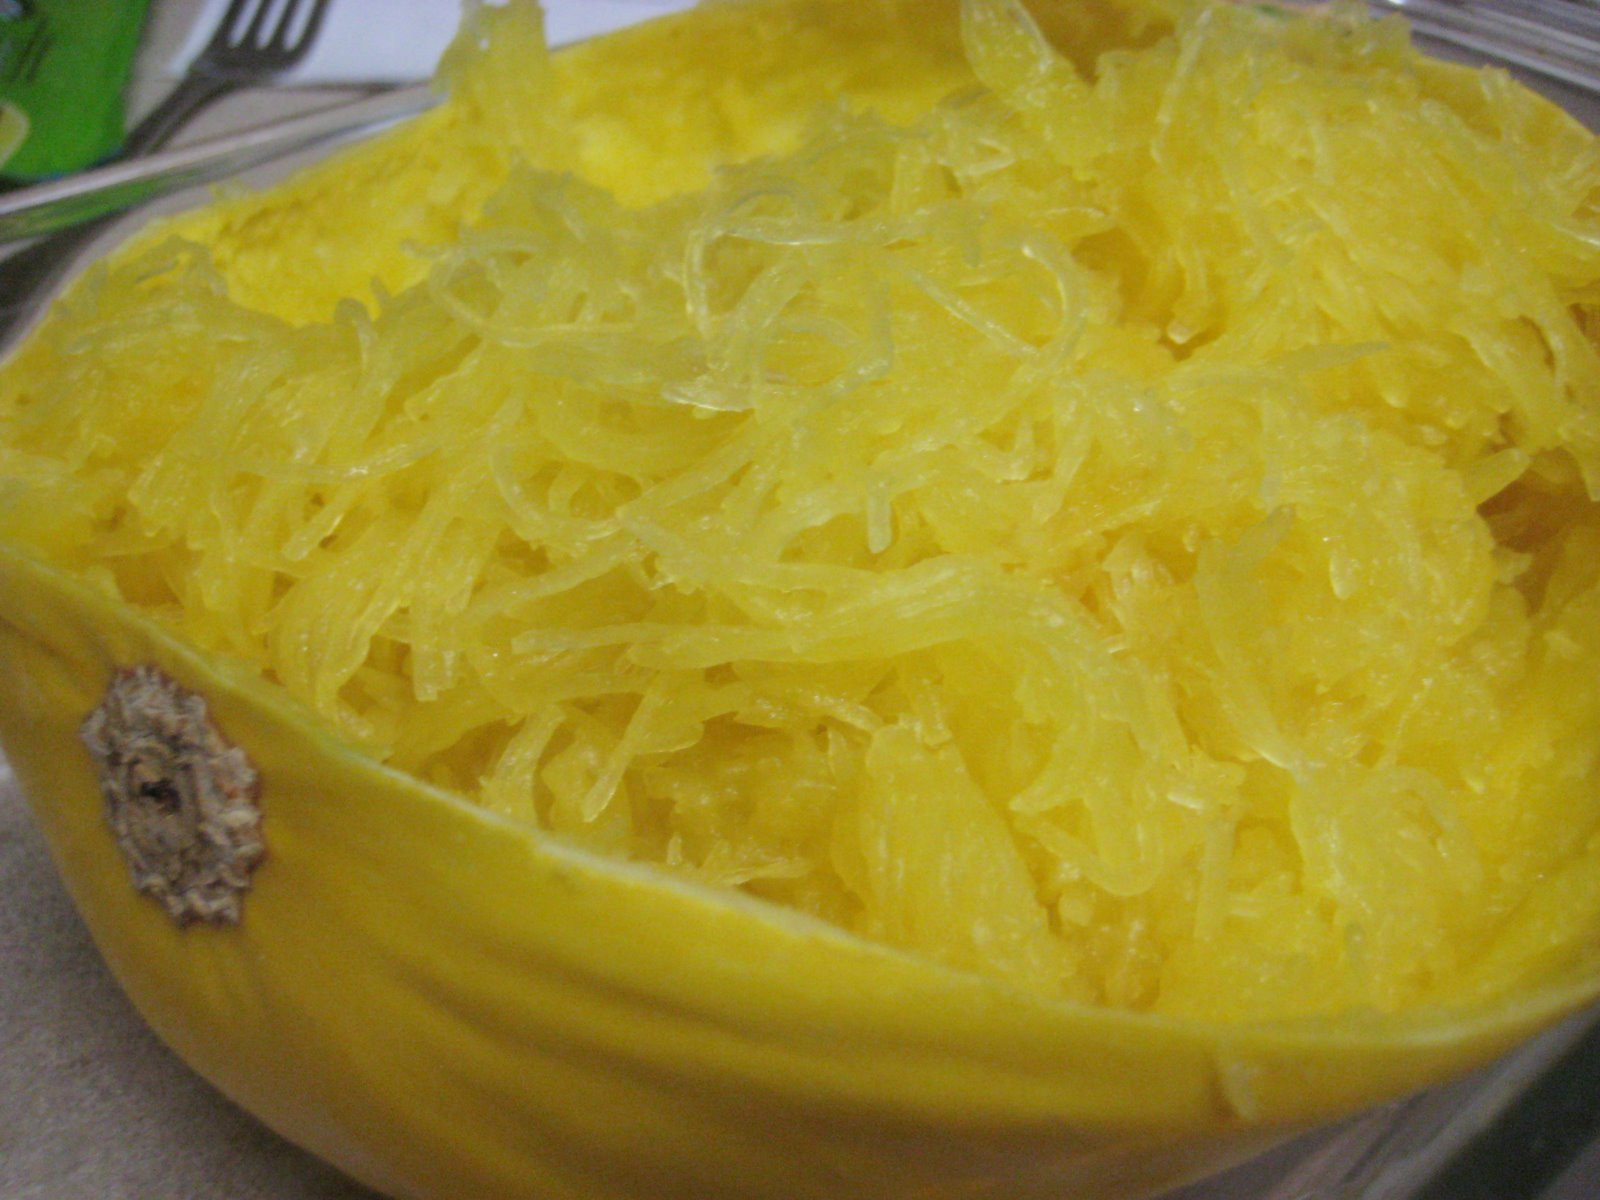 Soften Spaghetti Squash In Microwave
 "Put a Lyd on it " Spaghetti Squash in the Microwave